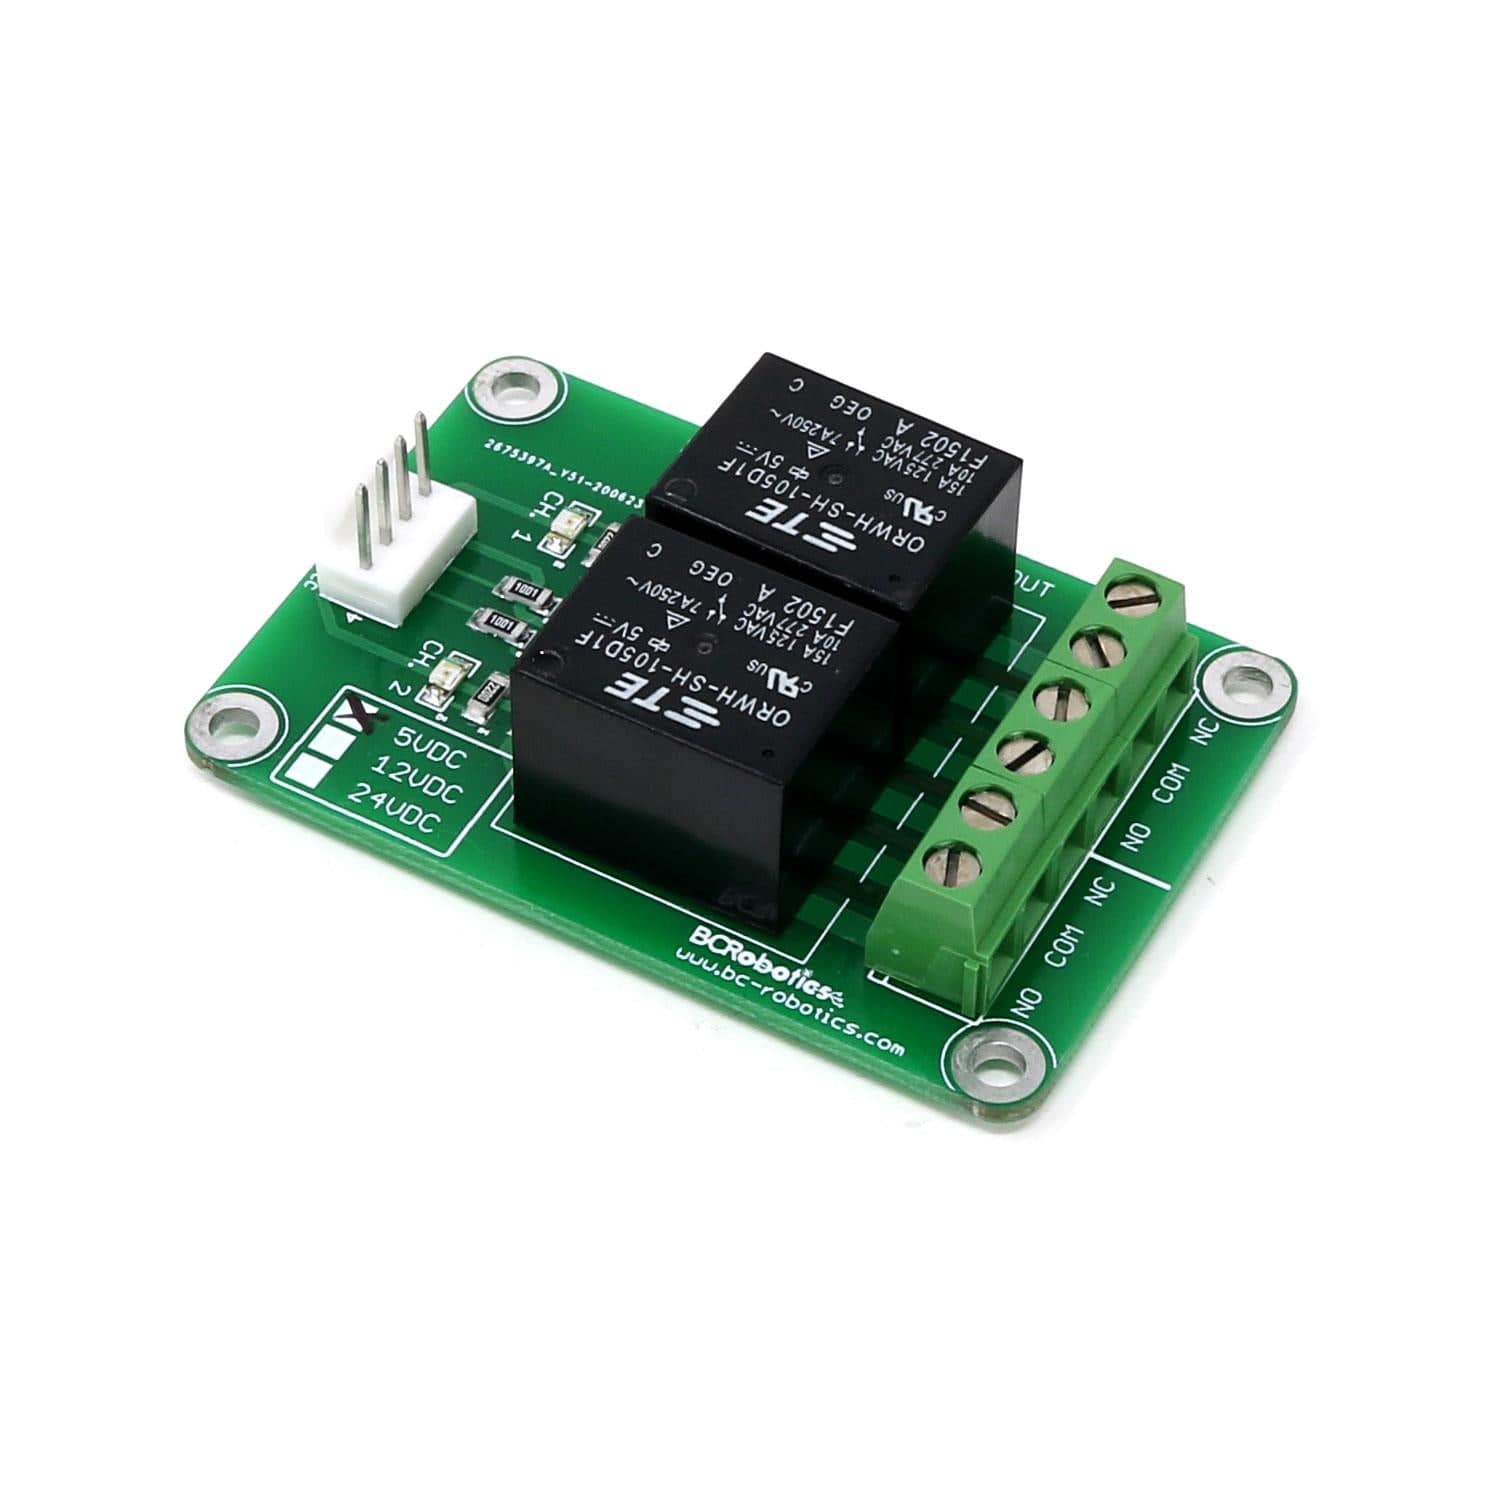 2 Channel Relay Breakout – 5V - The Pi Hut